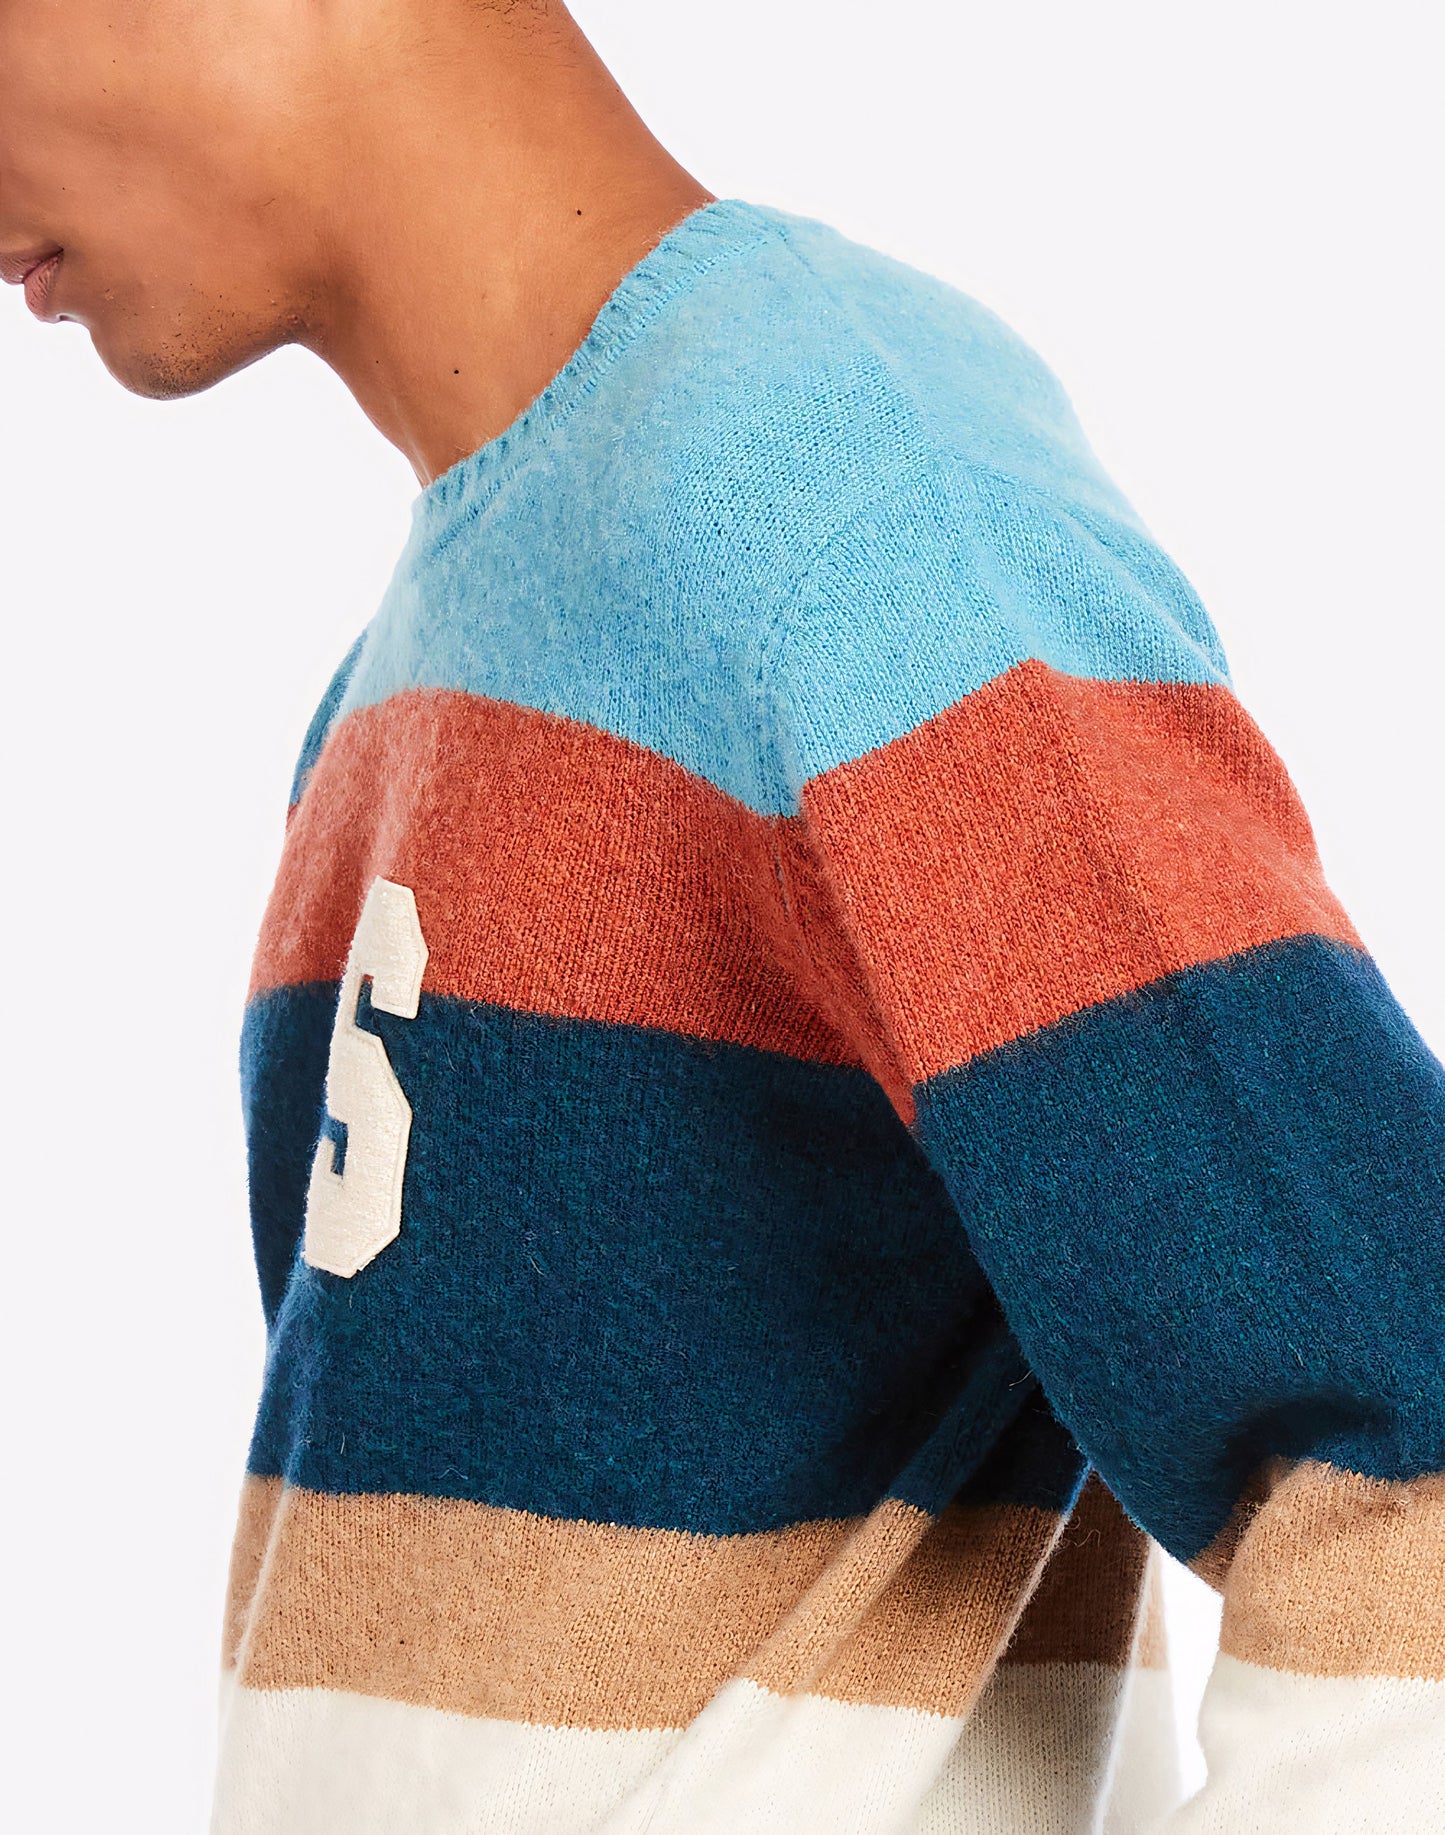 STRIPED CREW NECK JUMPER WITH PATCH